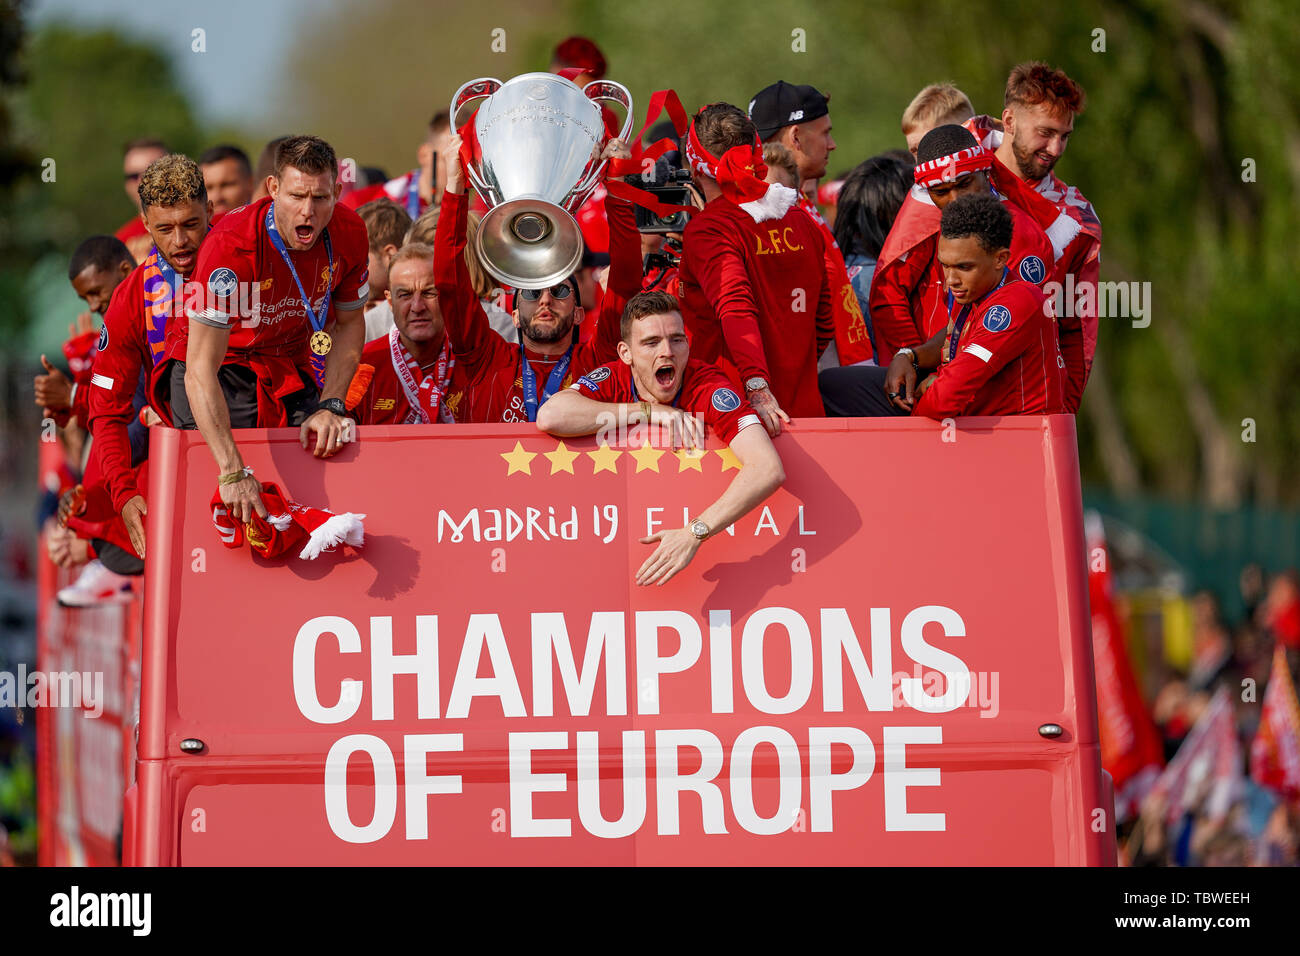 Liverpool Football club Champions League parade through the city on an open top bus.  2nd June 2019 , Liverpool, England; UEFA Champions League, Liverpool FC Champions League winners celebrations and open top bus parade ;    Credit: Terry Donnelly/News Images Stock Photo